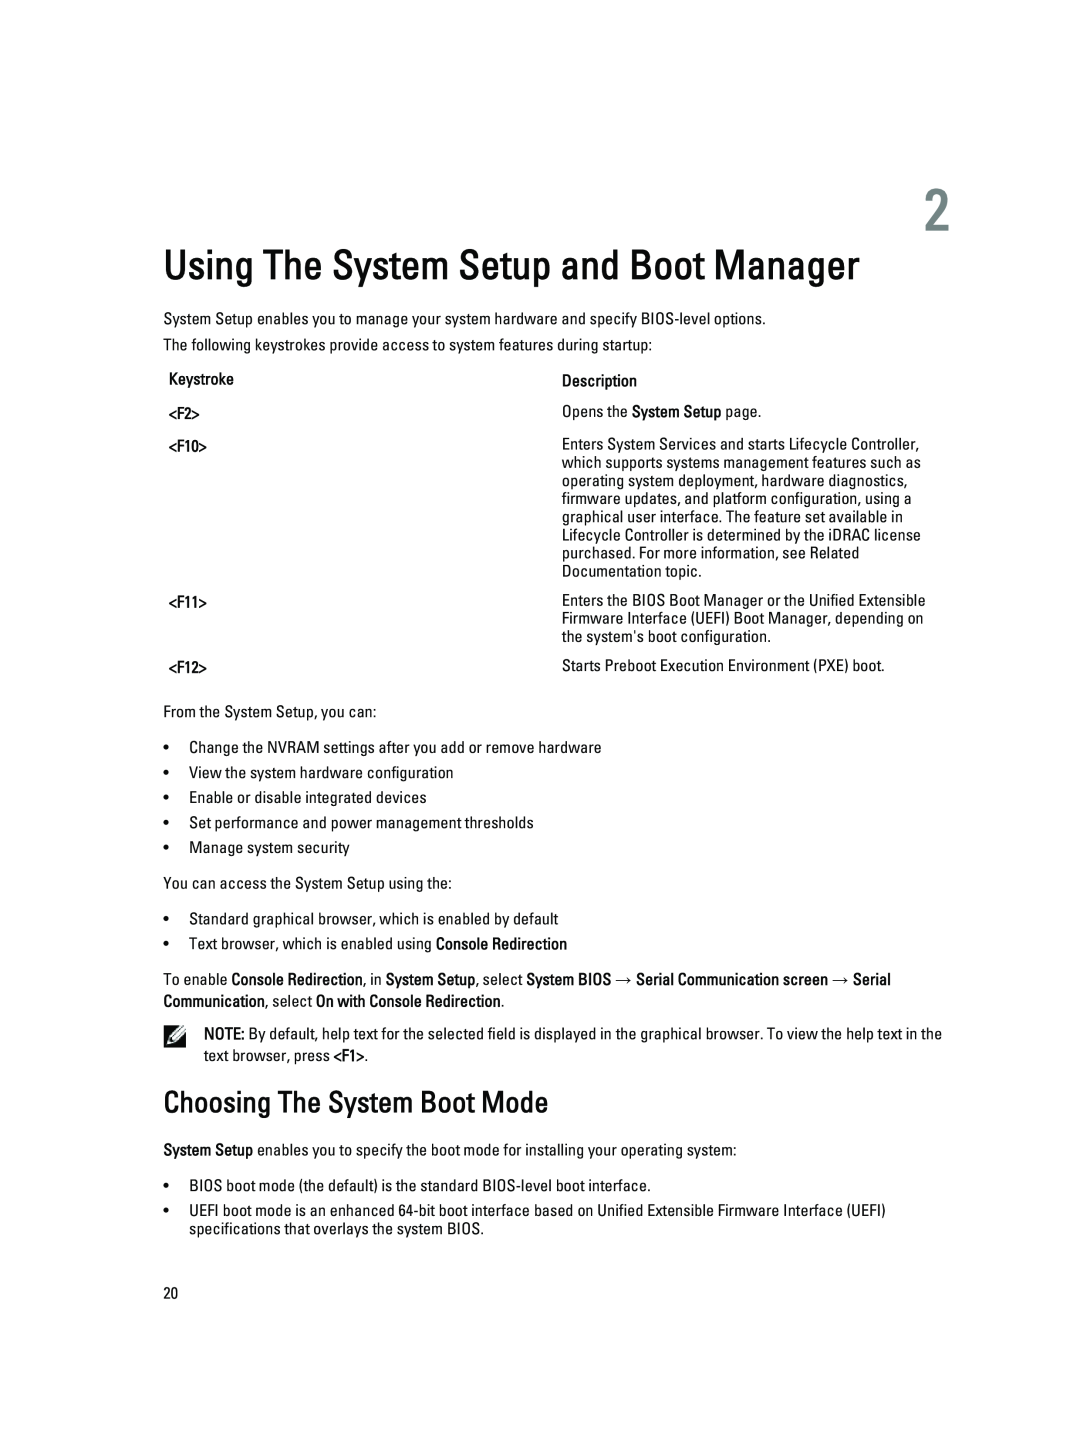 Dell R720XD owner manual Using The System Setup and Boot Manager, Choosing The System Boot Mode 